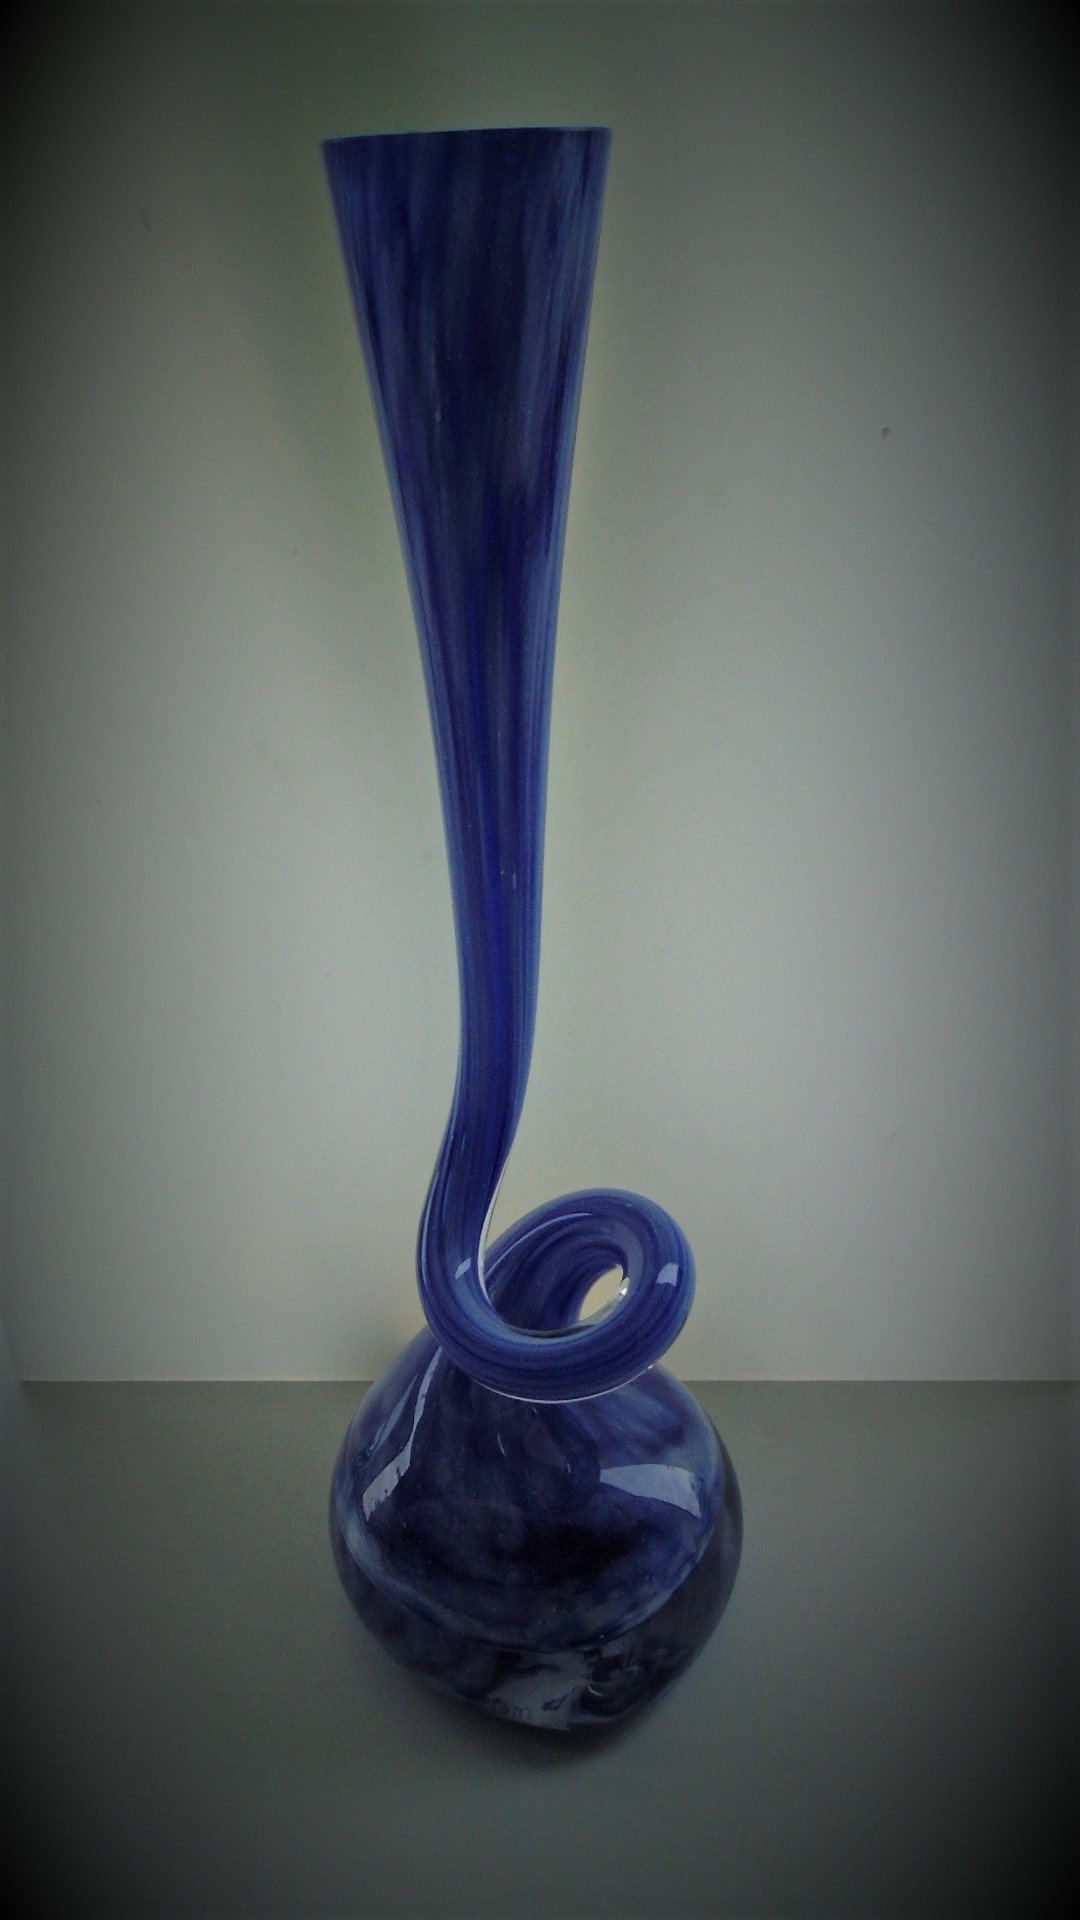 Offered for sale is what I believe to be a handmade art glass Makora Krosno style blue cork screw bud vase